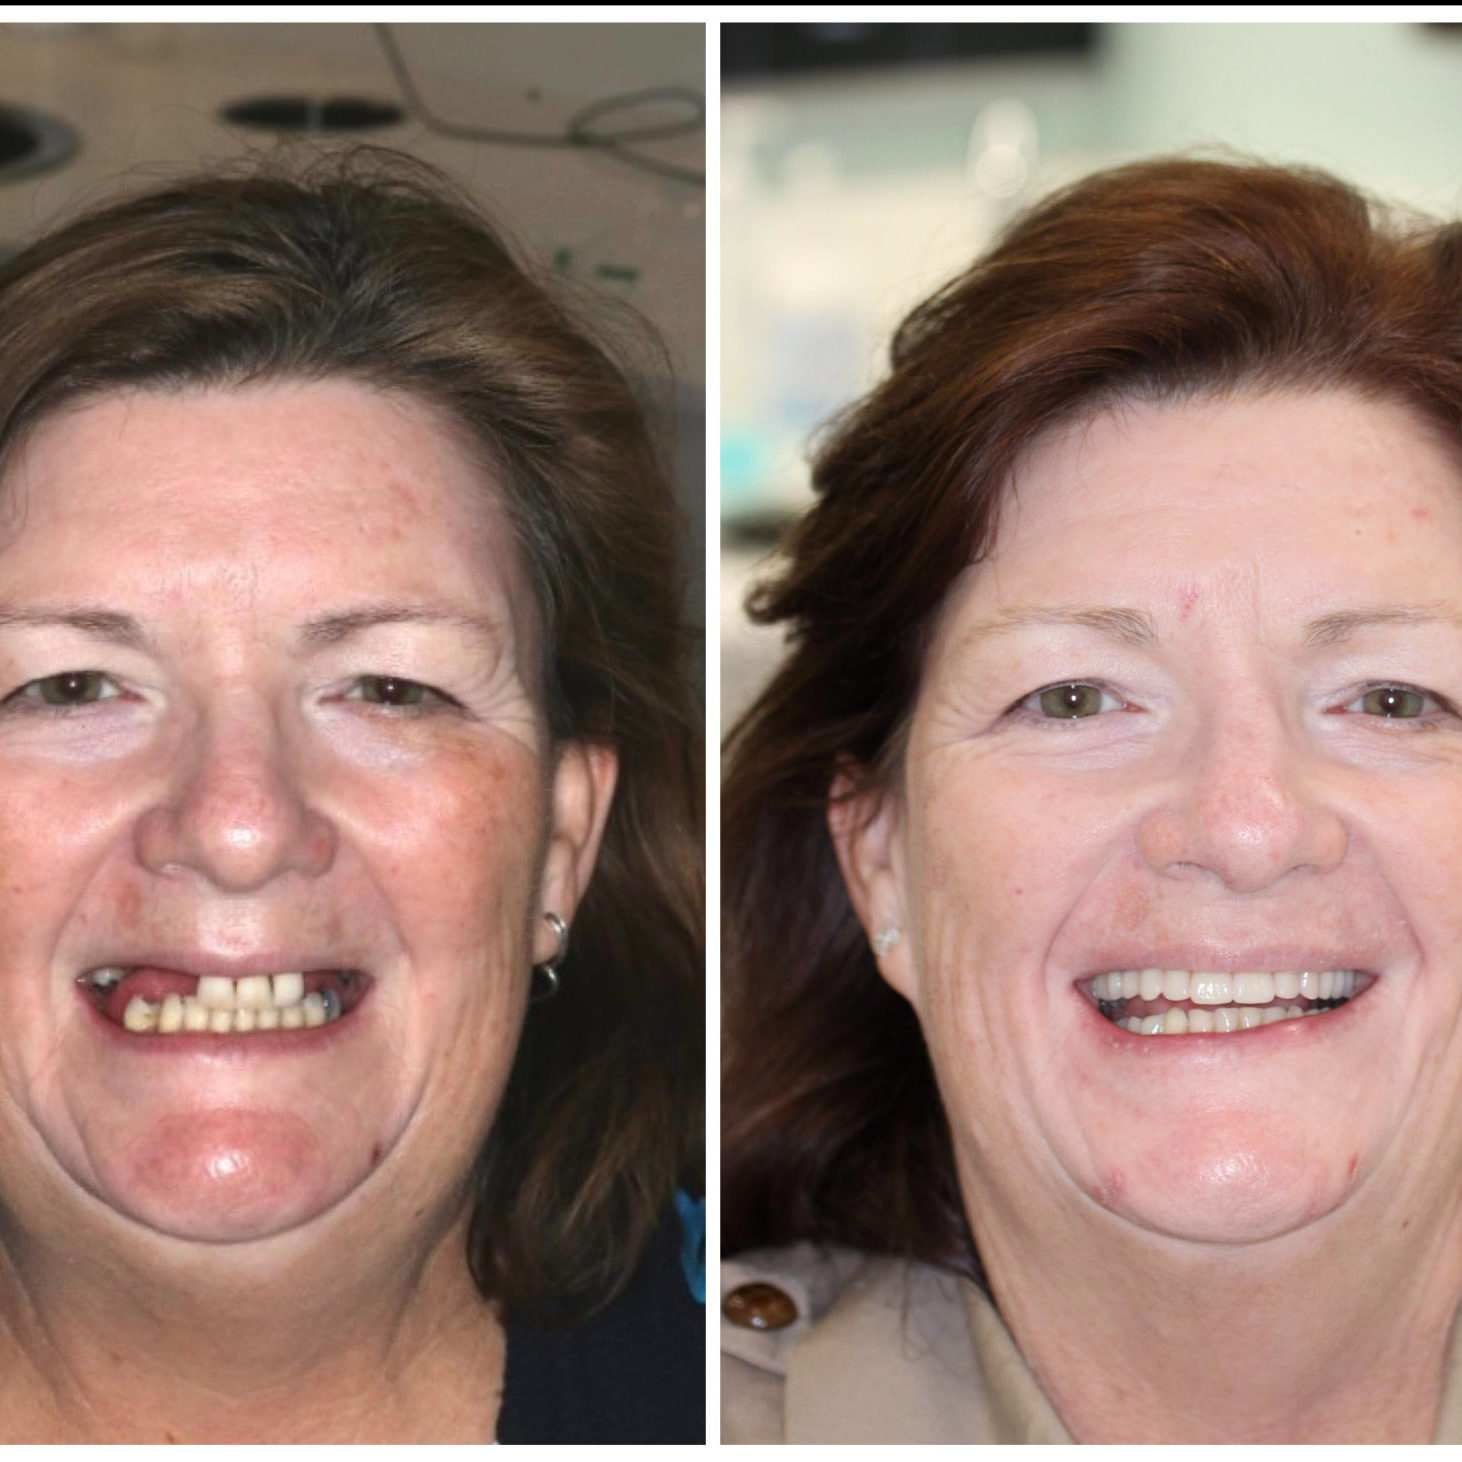 Confidence back with implant dentures